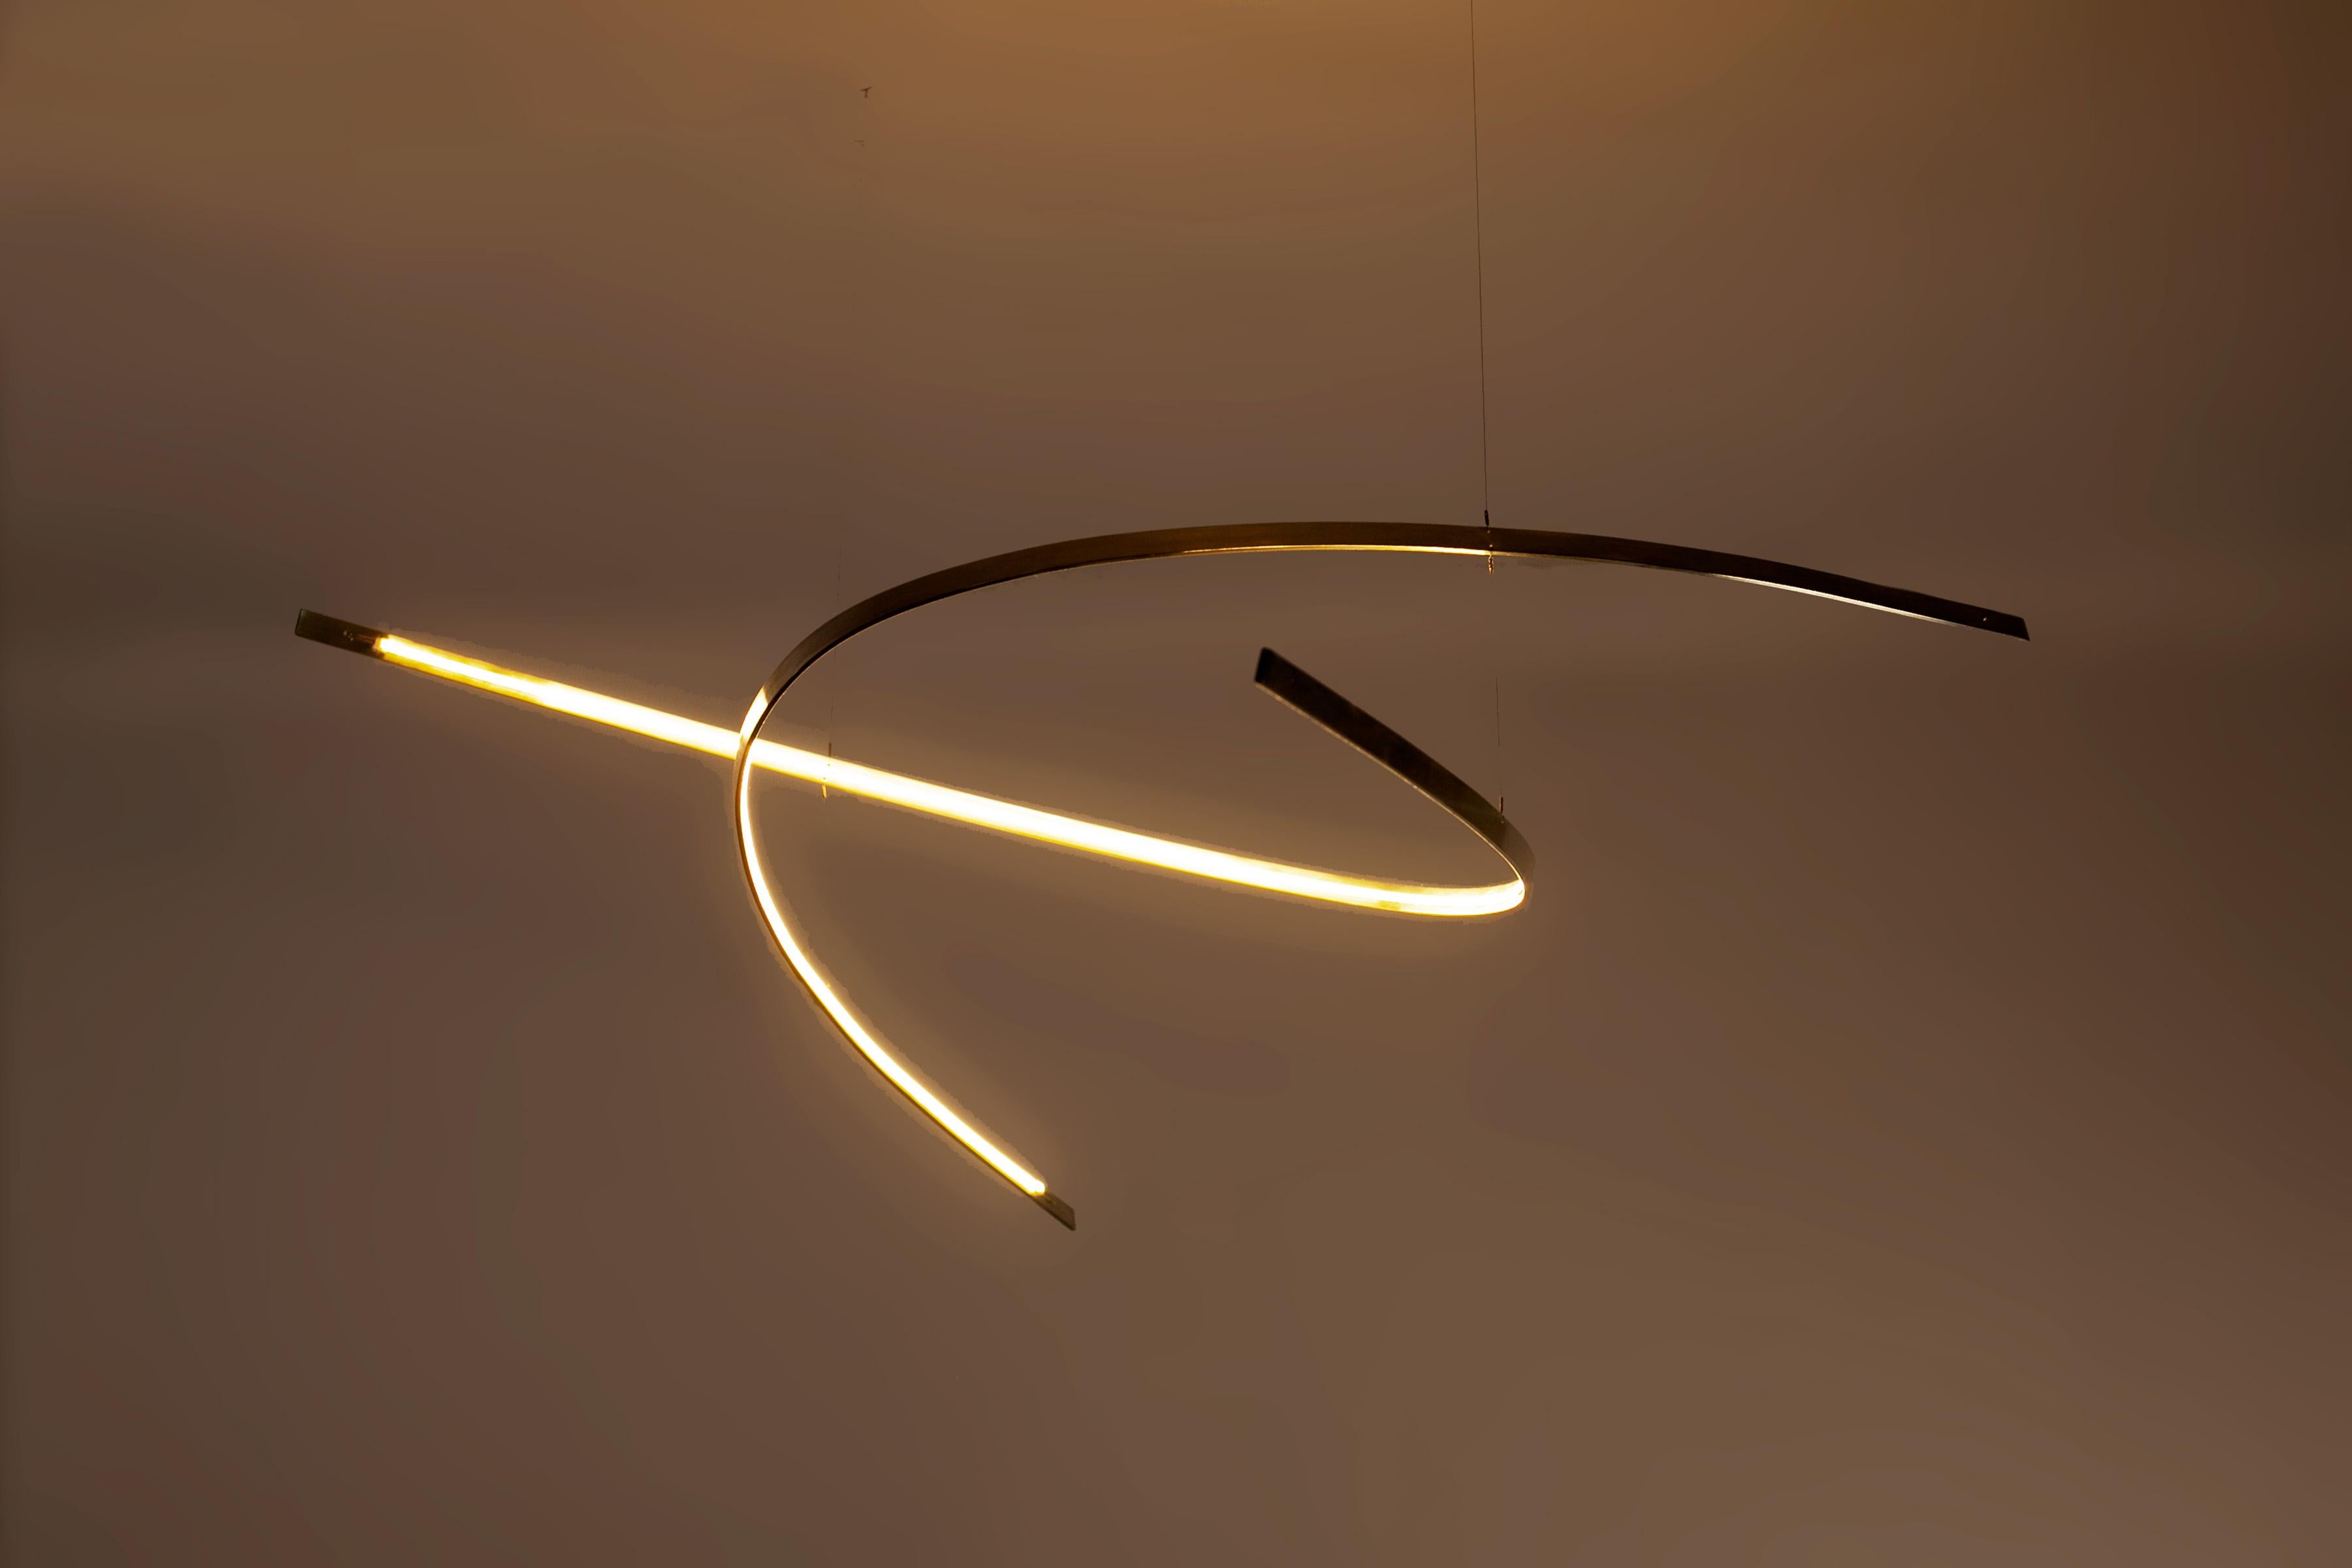 Arx is a modernist inspired, modestly scaled chandelier-pendant.

As with all From the Sky pieces, the LED strip used is 92+ CRI (Colour Rendering Index), meaning it emits a rich and calming light. In the case of Arx, this light is a slightly dimmed